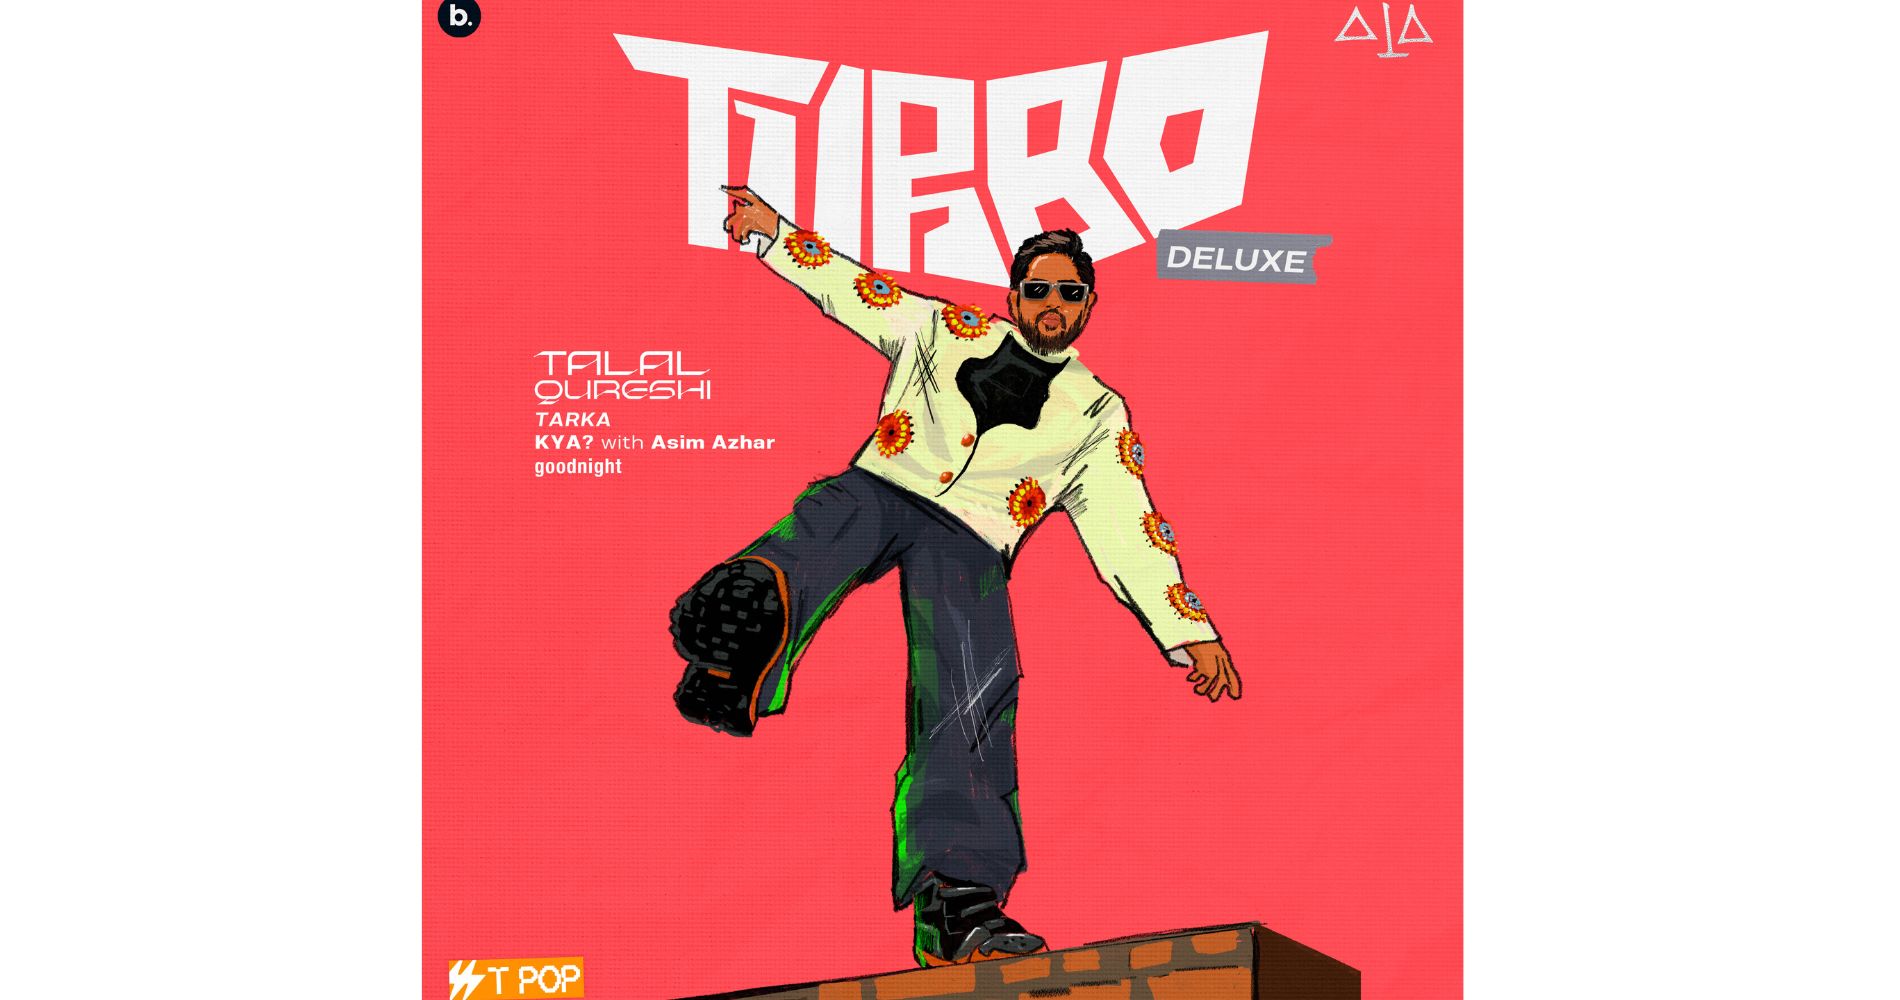 Talal Qureshi's Debut Album 'TURBO' Gets A Revamp With Exciting